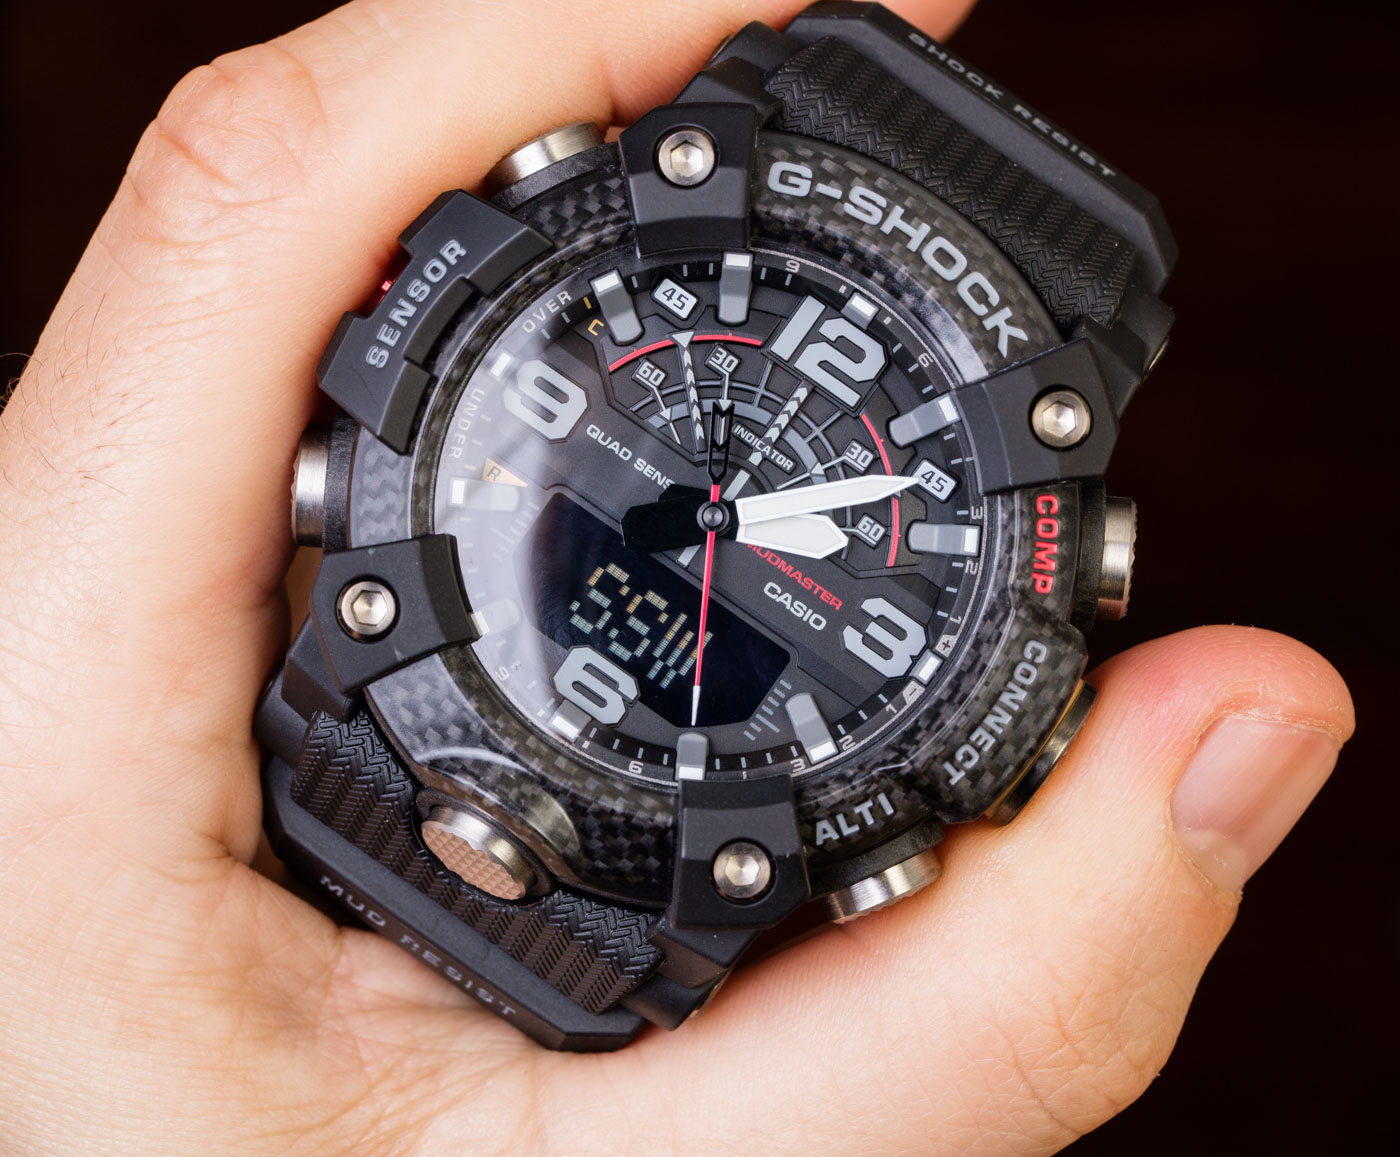 Casio G-Shock Mudmaster GG-B100 Watch Review: Full Of Style, Value